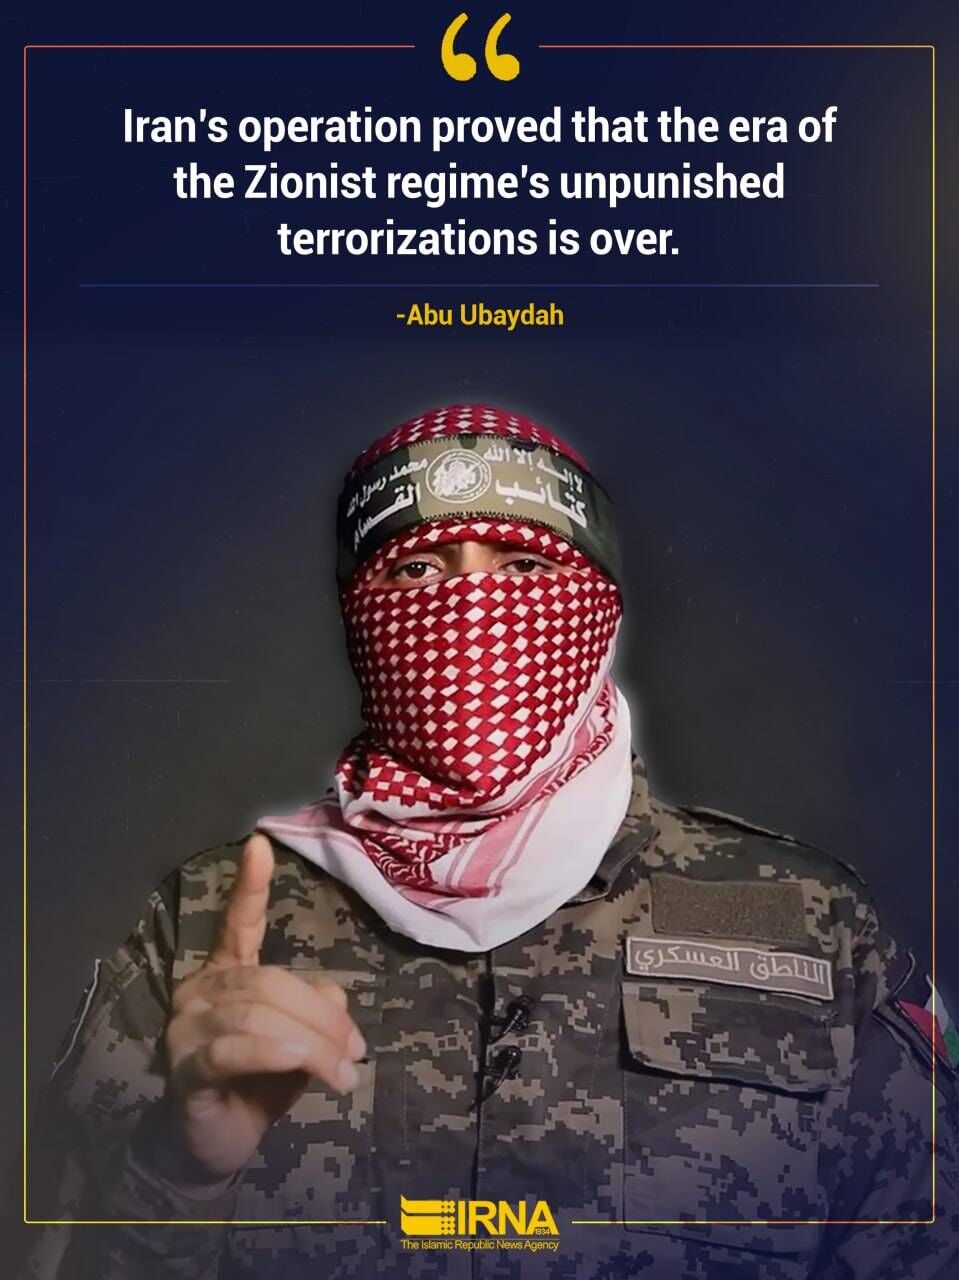 Abu Ubaydah's opinion on Iran's punitive attack on Zionist regime